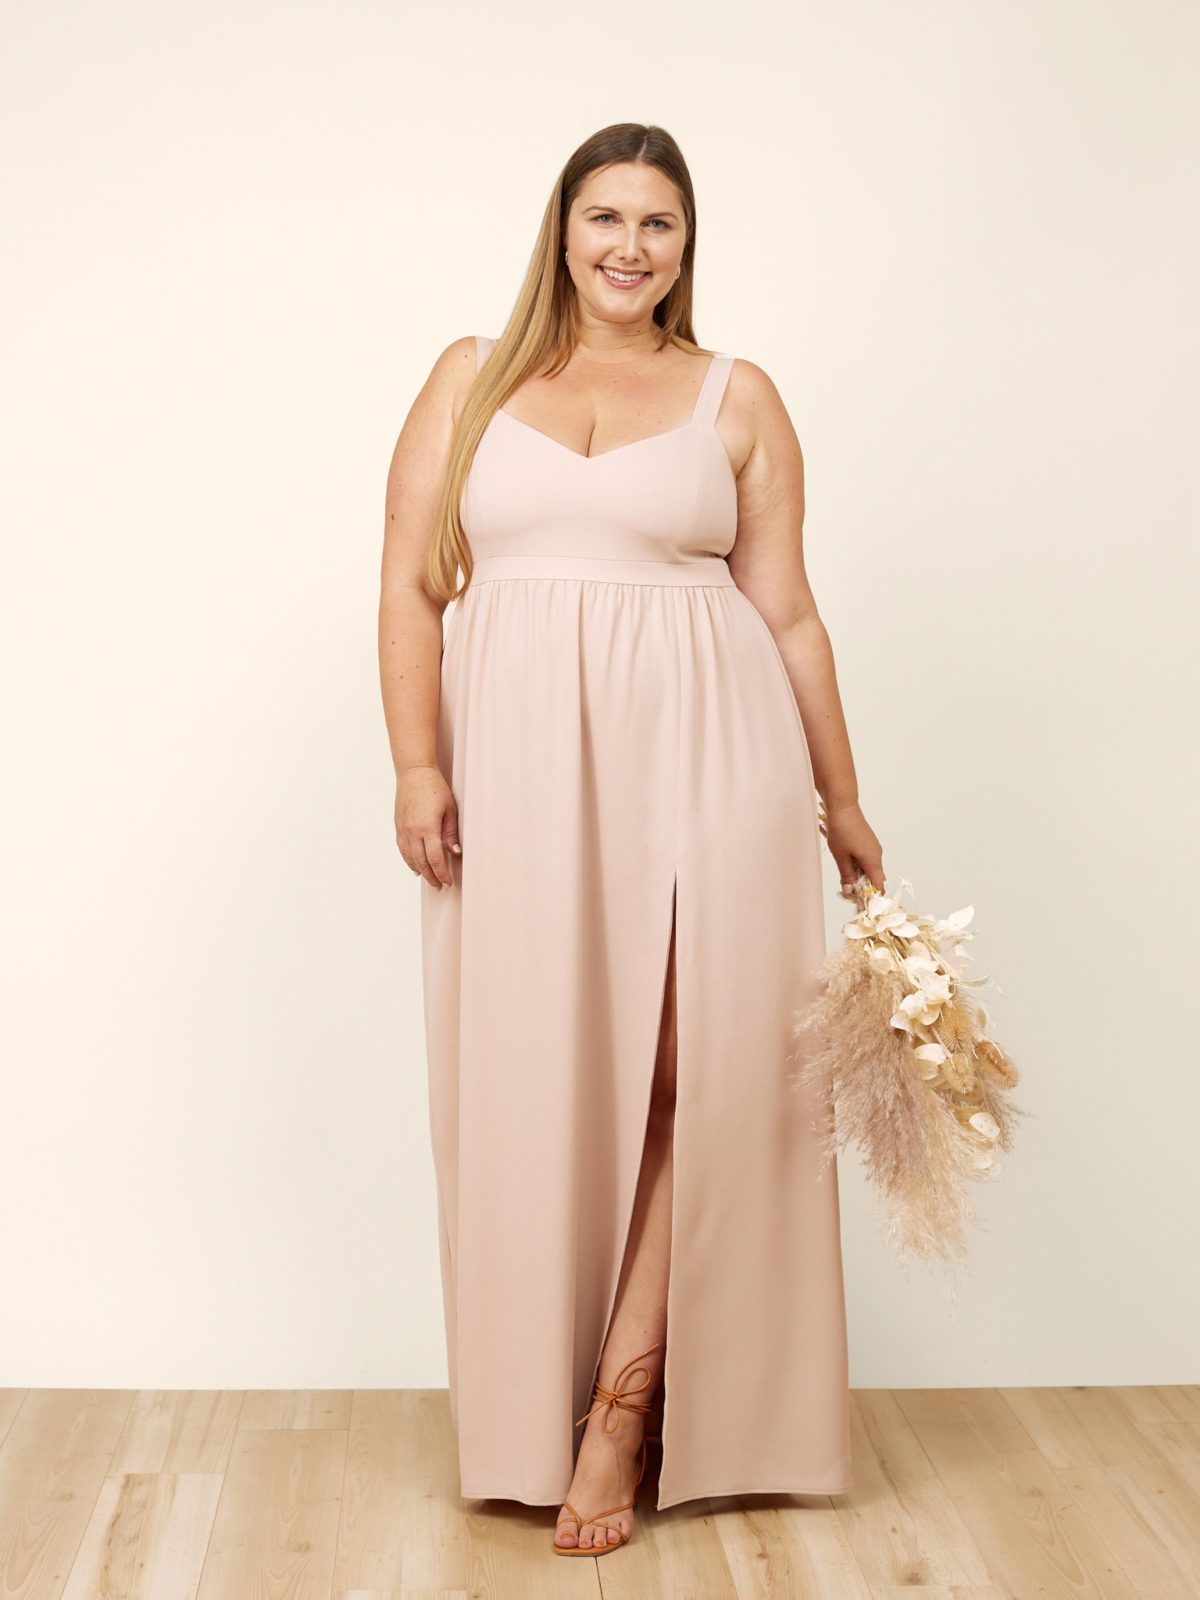 Blush bridesmaid gown from Park & Fifth